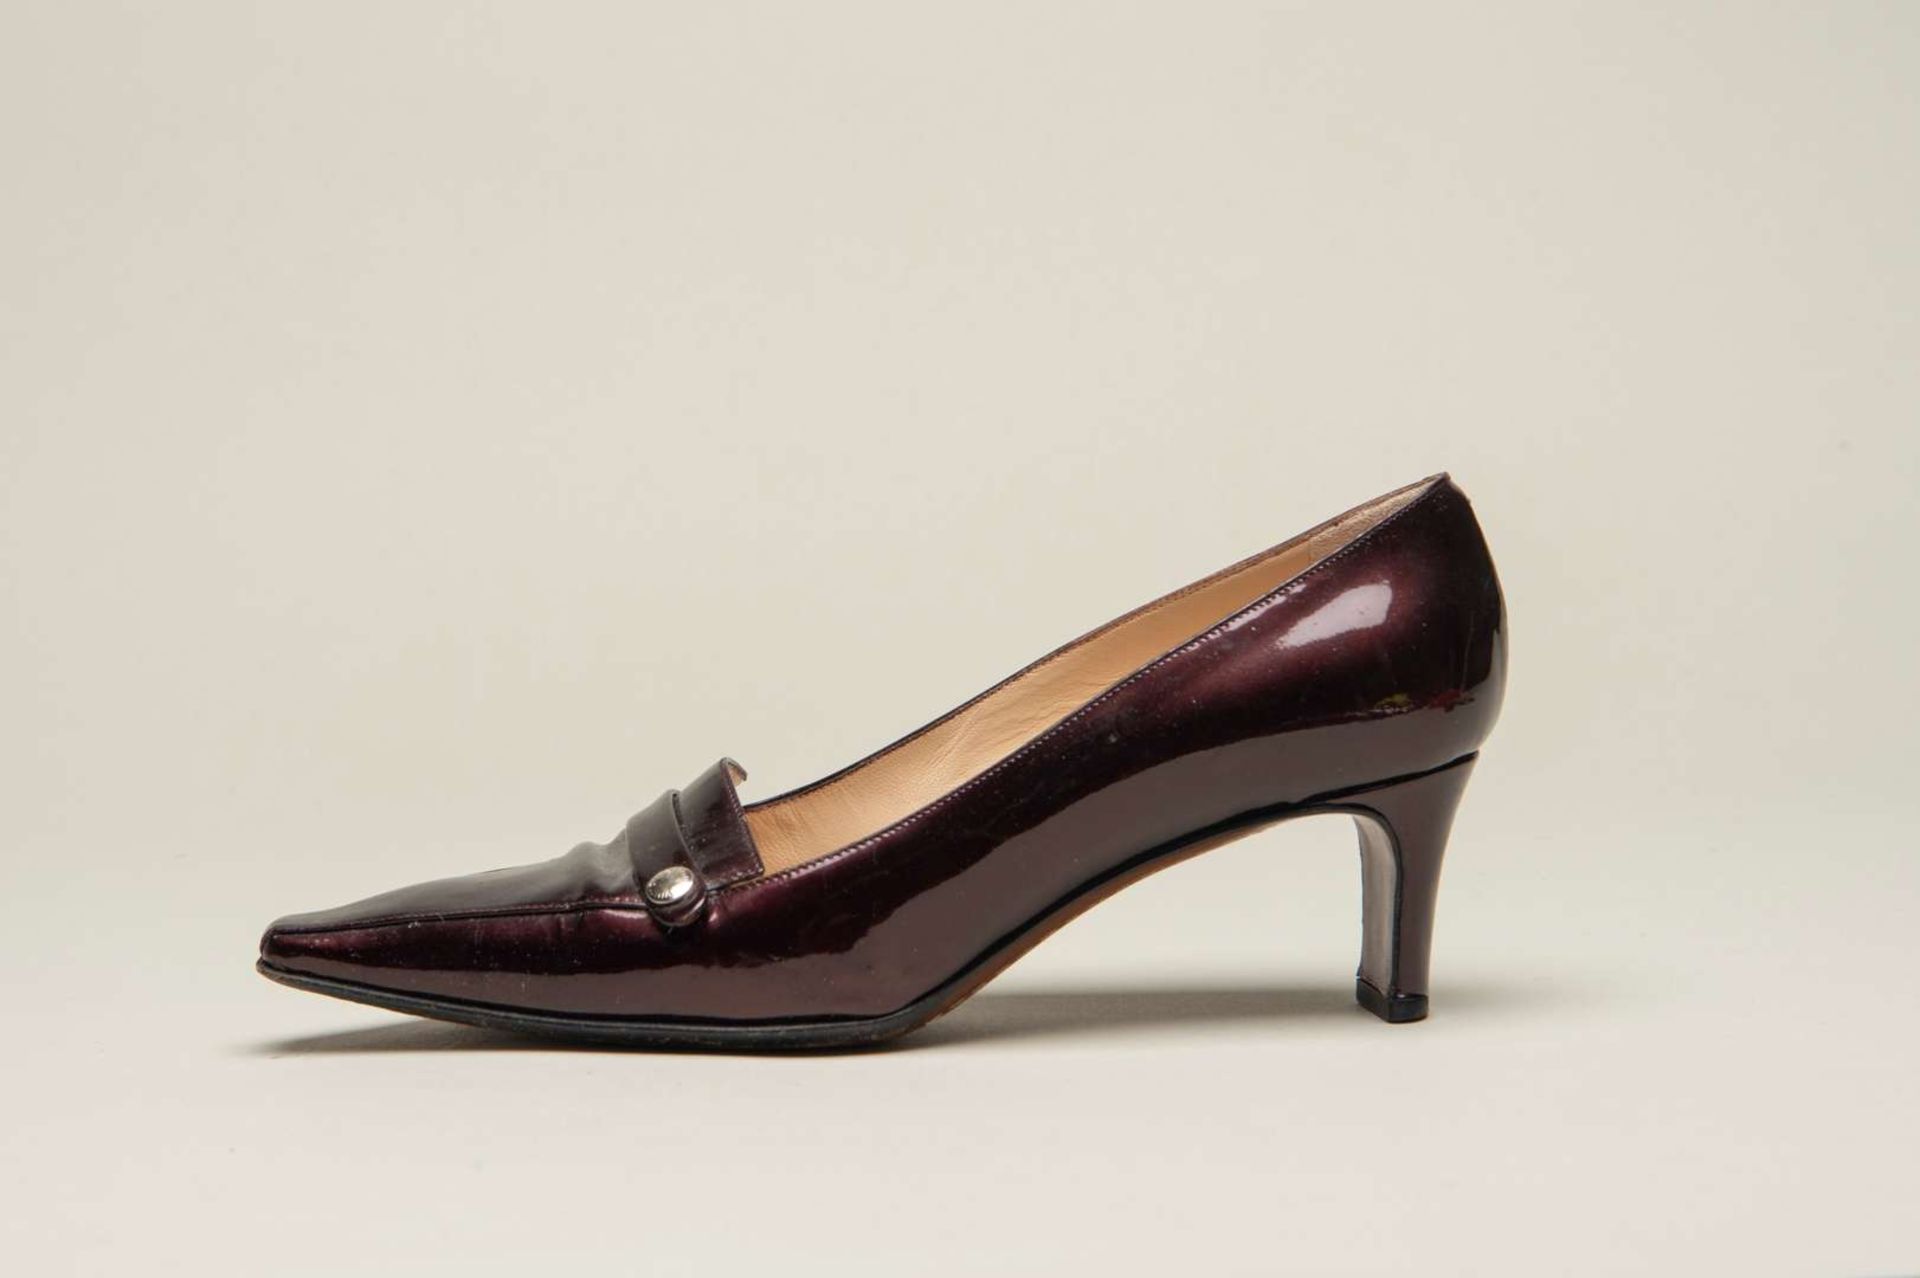 LOUIS VUITTON, a pair of dark bronze, patent leather pumps - Image 3 of 6